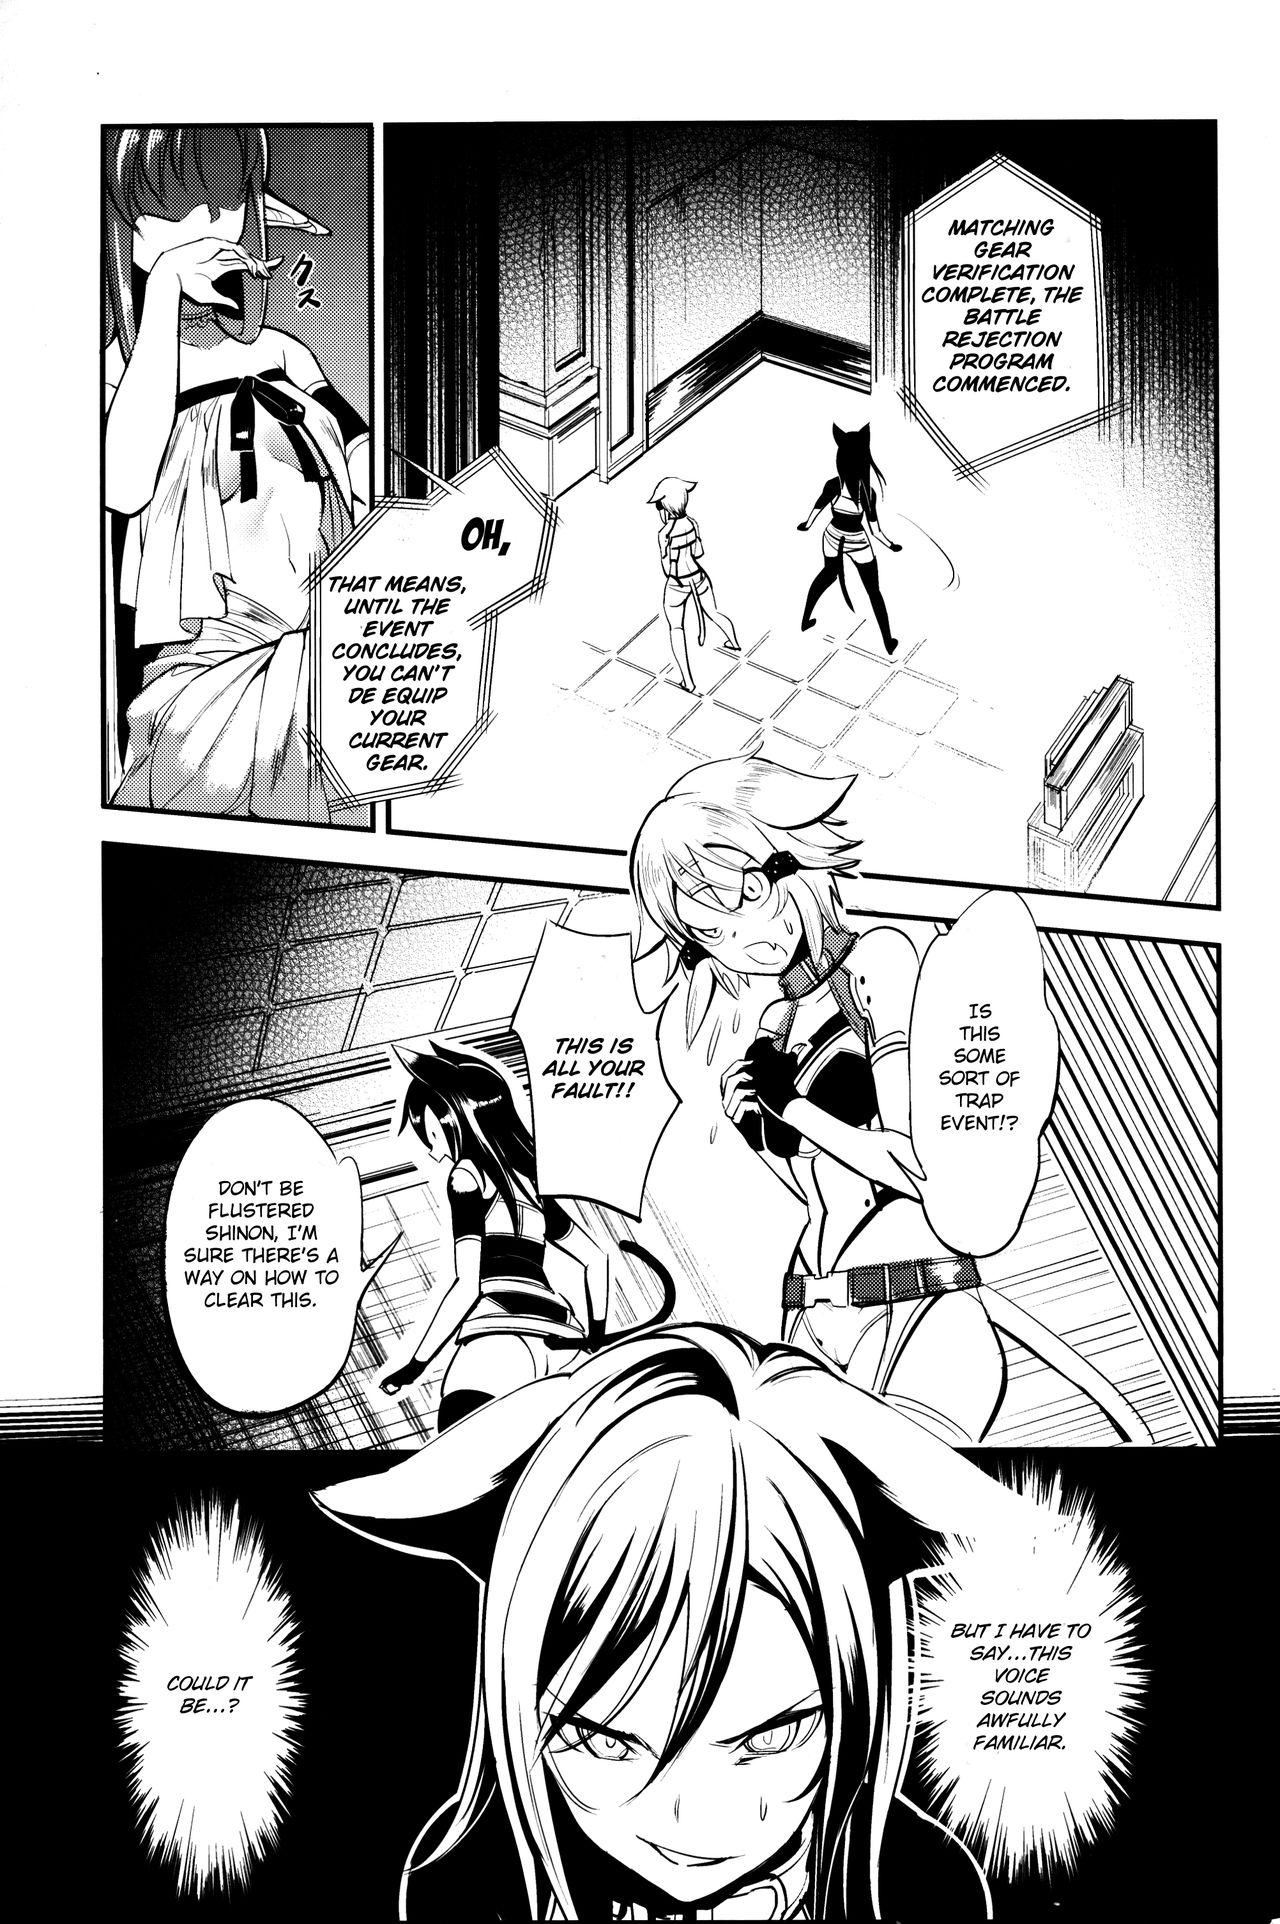 Groping MONSTER HOUSE QUEST - Sword art online Free Amateur - Page 4